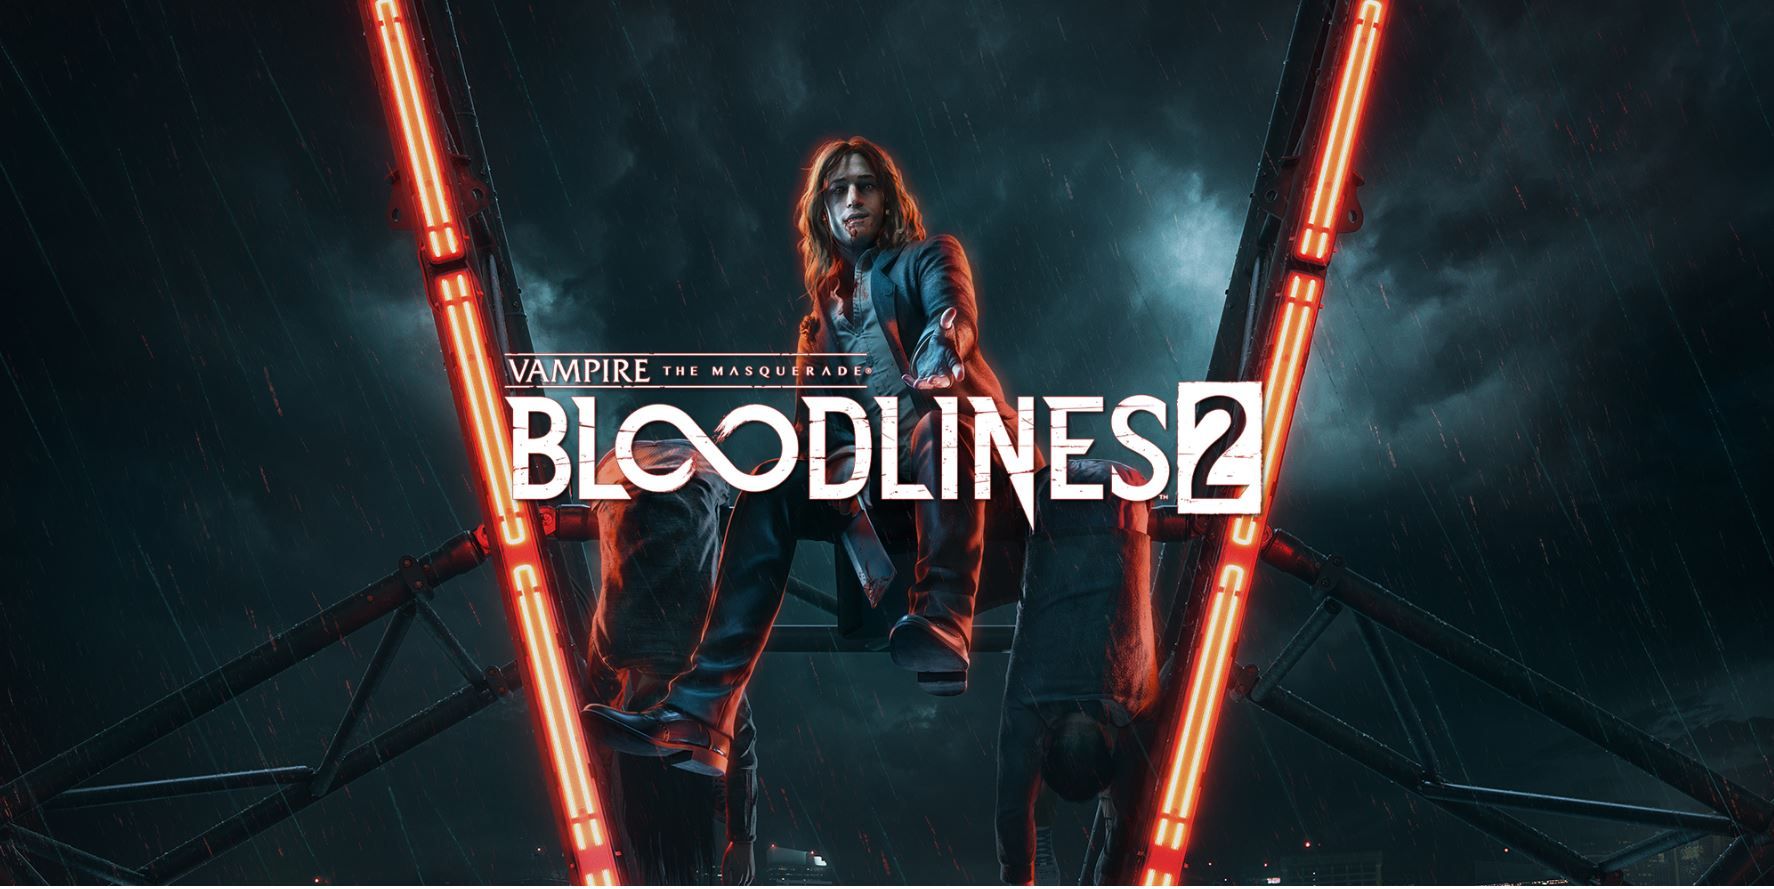 Vampire the Masquerade Bloodlines 2 Epic Games Store Steam Exclusive PC